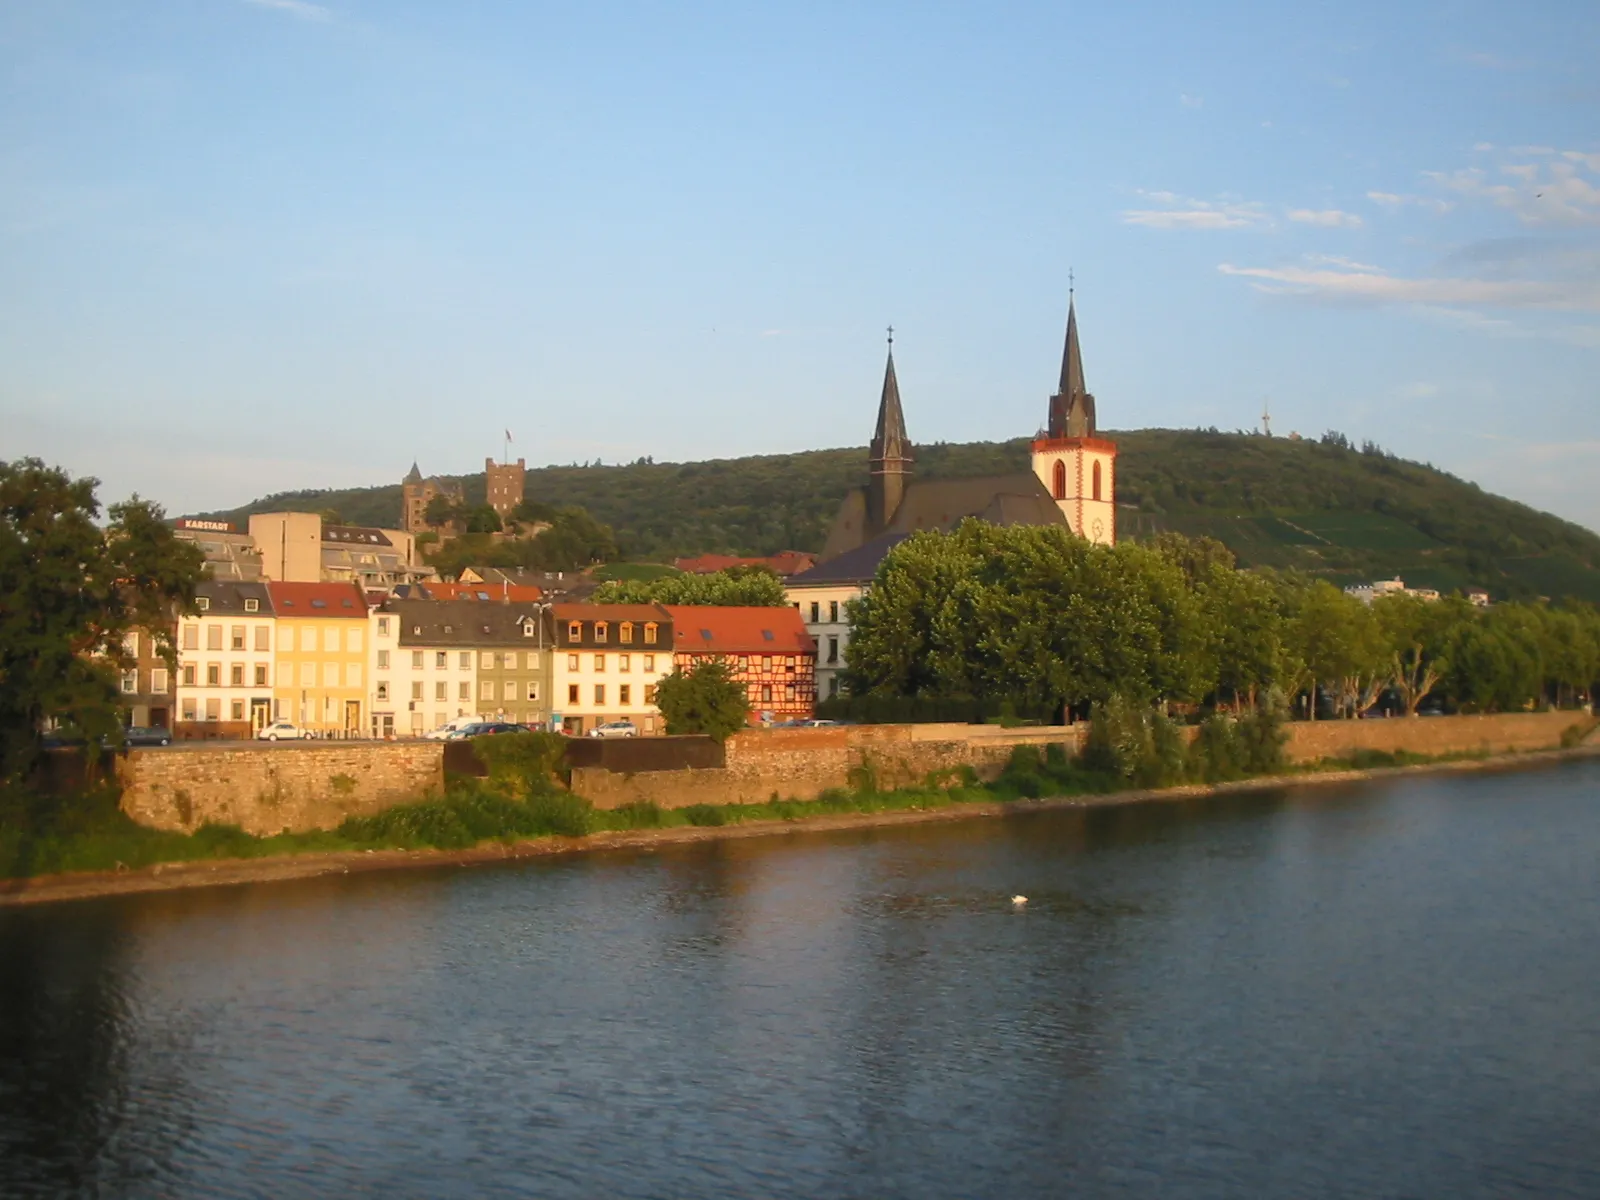 Photo showing: Bingen am Rhein view, with the St Martin basilica, the Burg Klopp and the Nahe river.

Photo taken by Barbara WALTER.